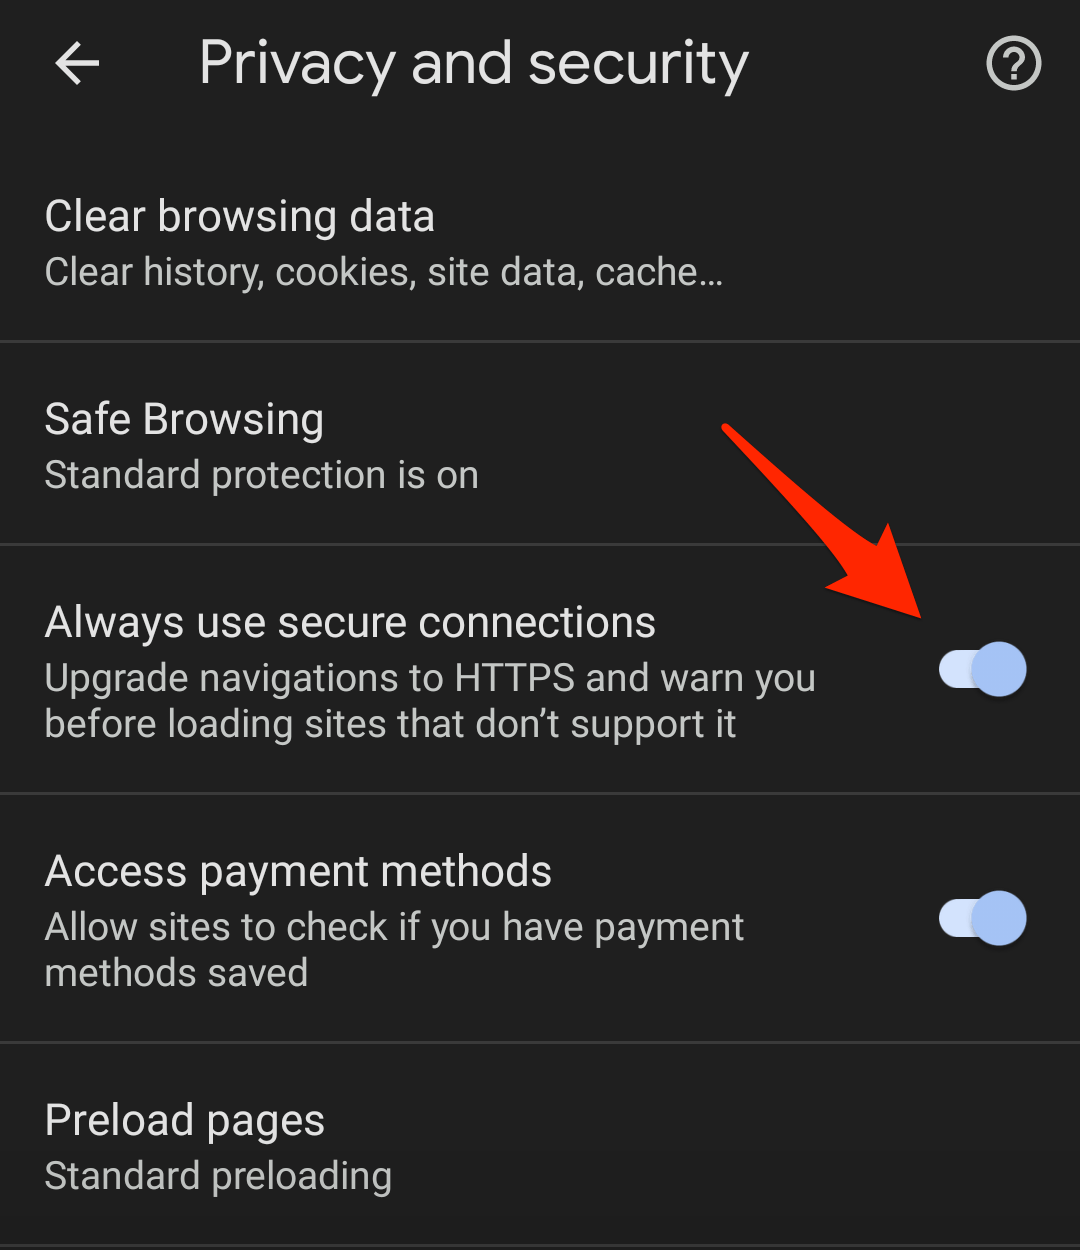 Always use secure connections turned ON in Chrome Android